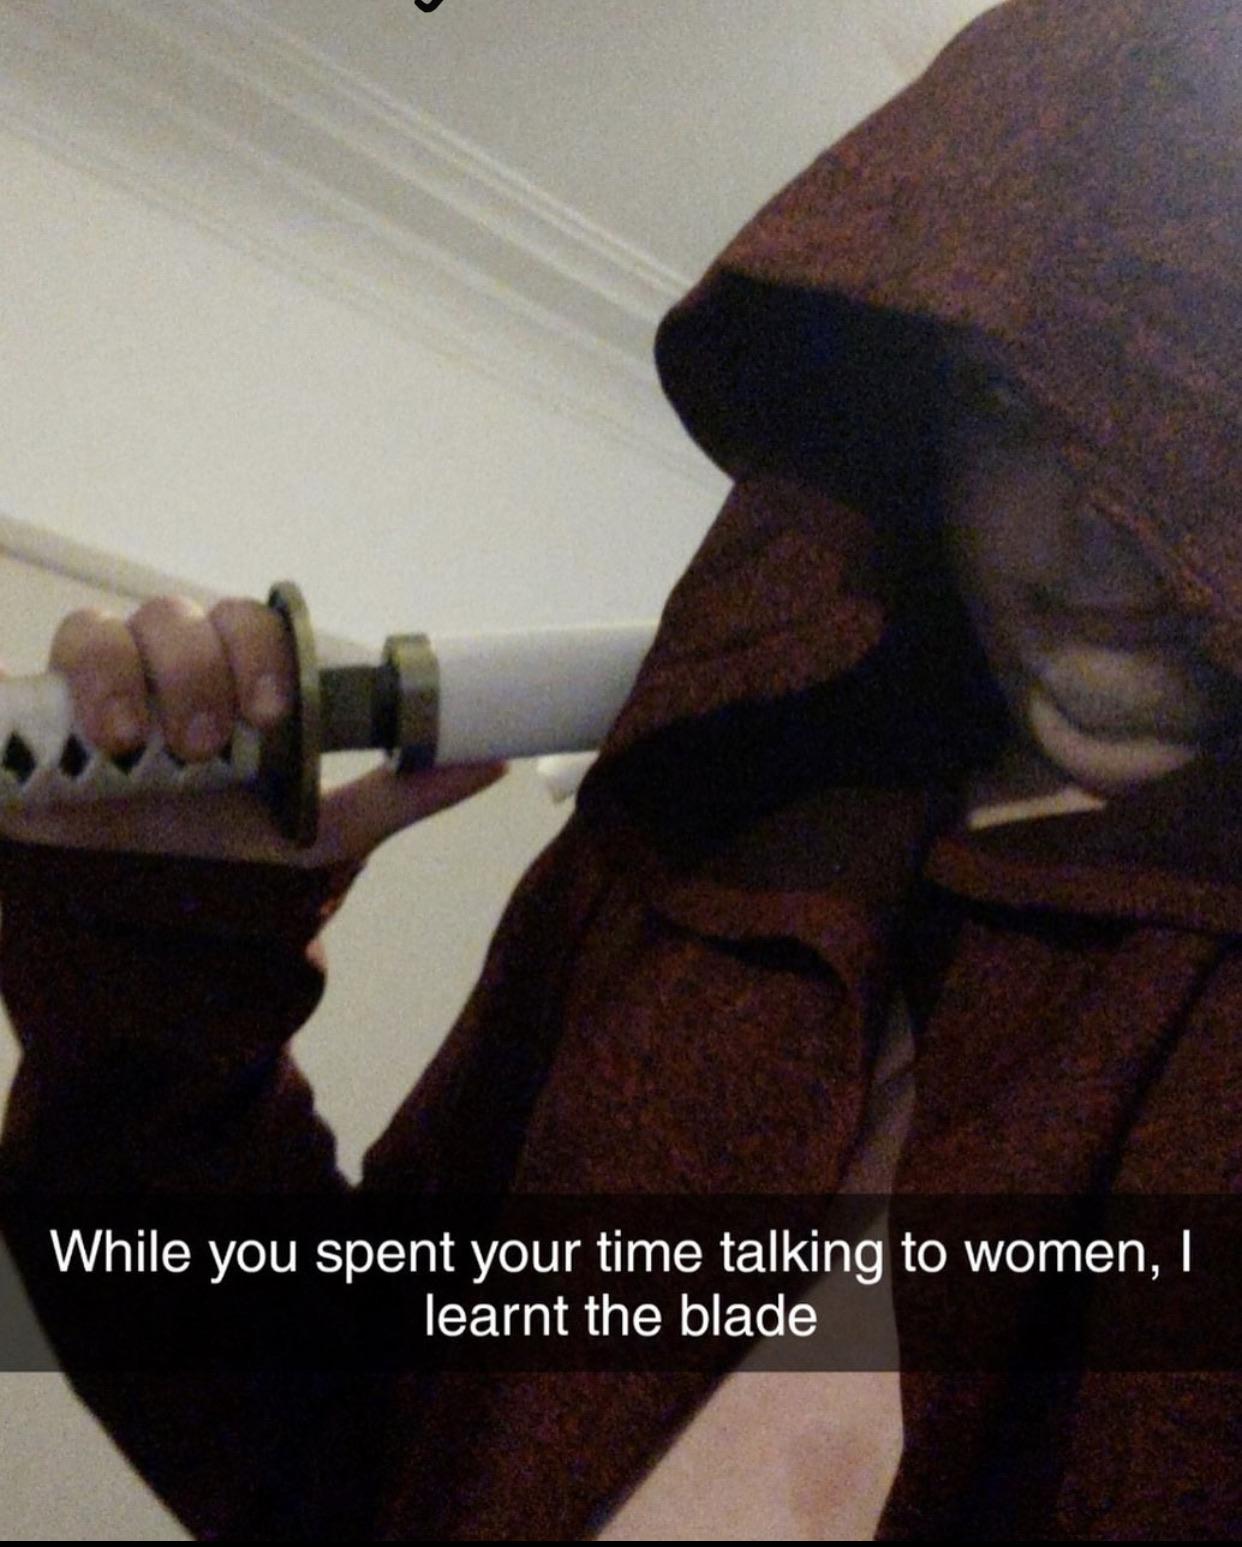 photo caption - While you spent your time talking to women, learnt the blade